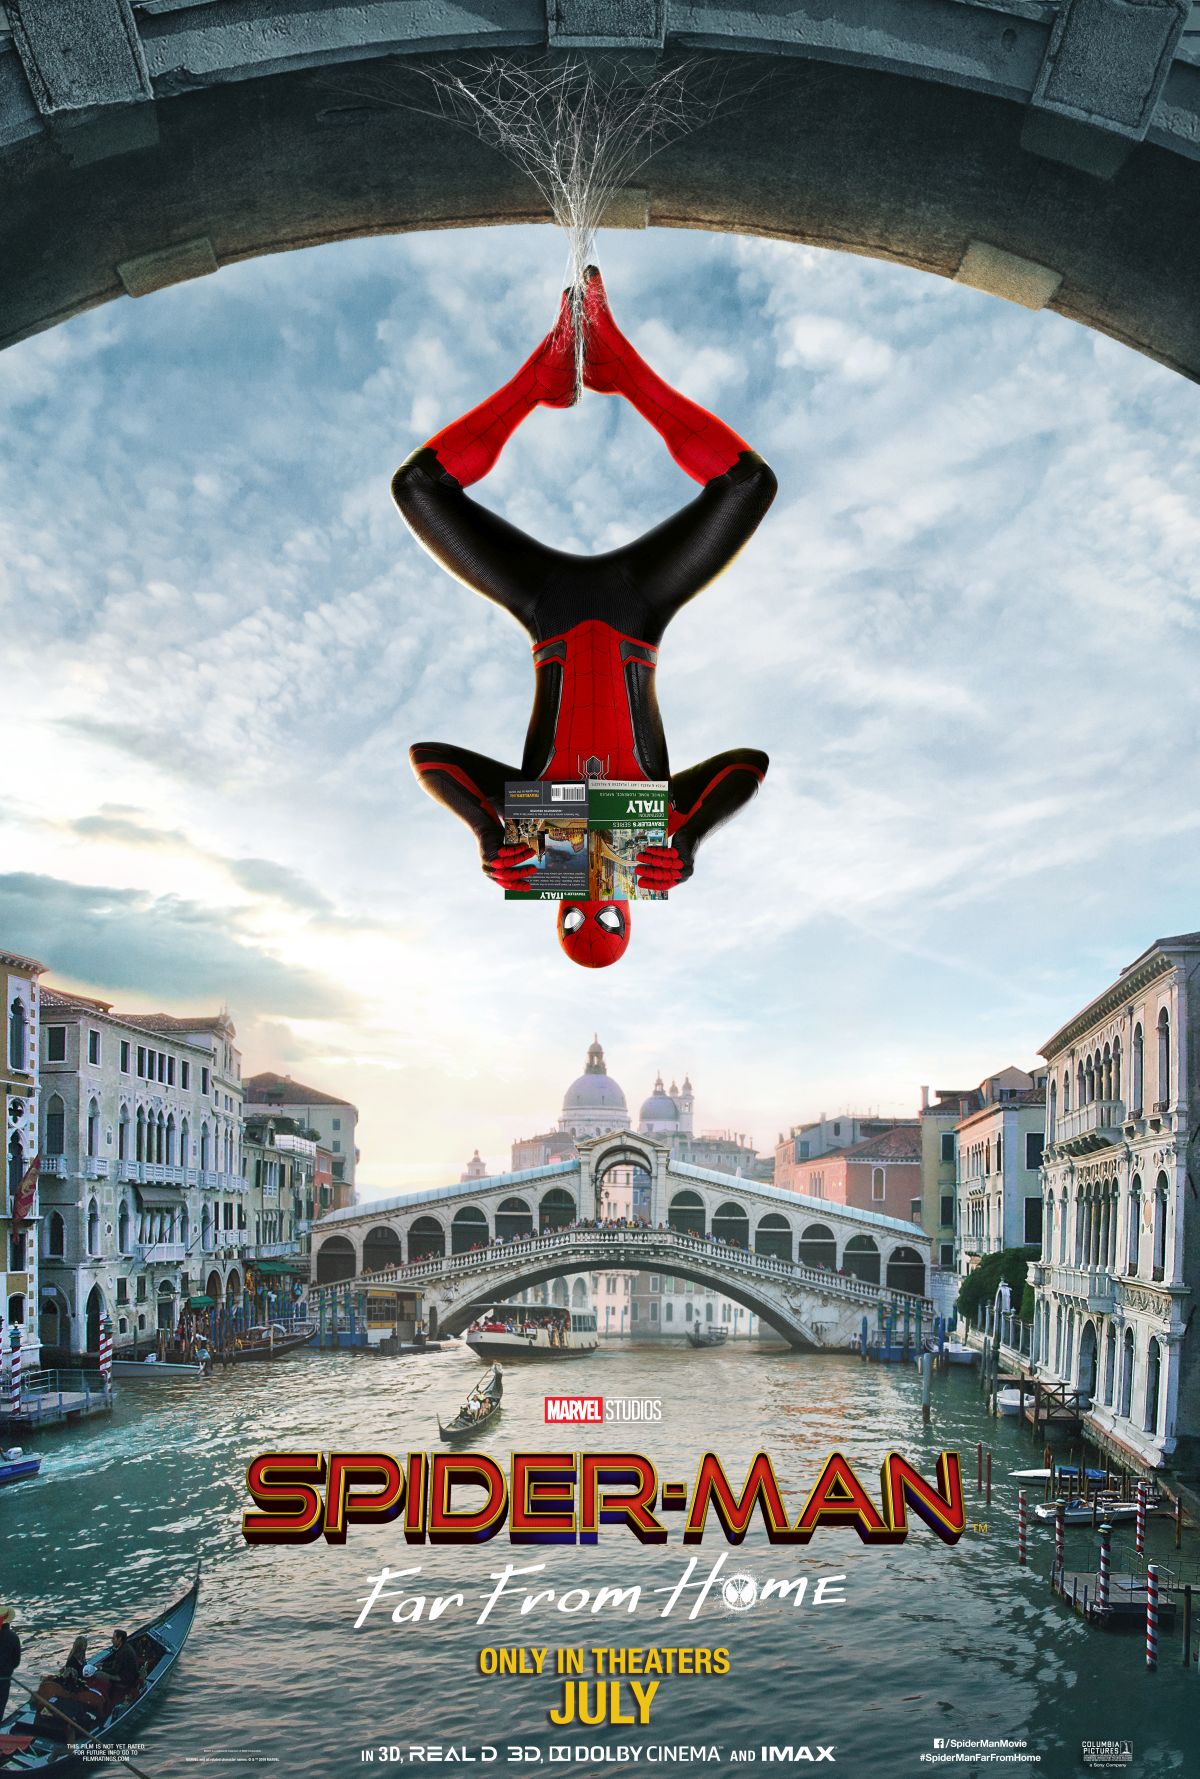 Spider-Man Goes International in New Far From Home Posters1200 x 1779